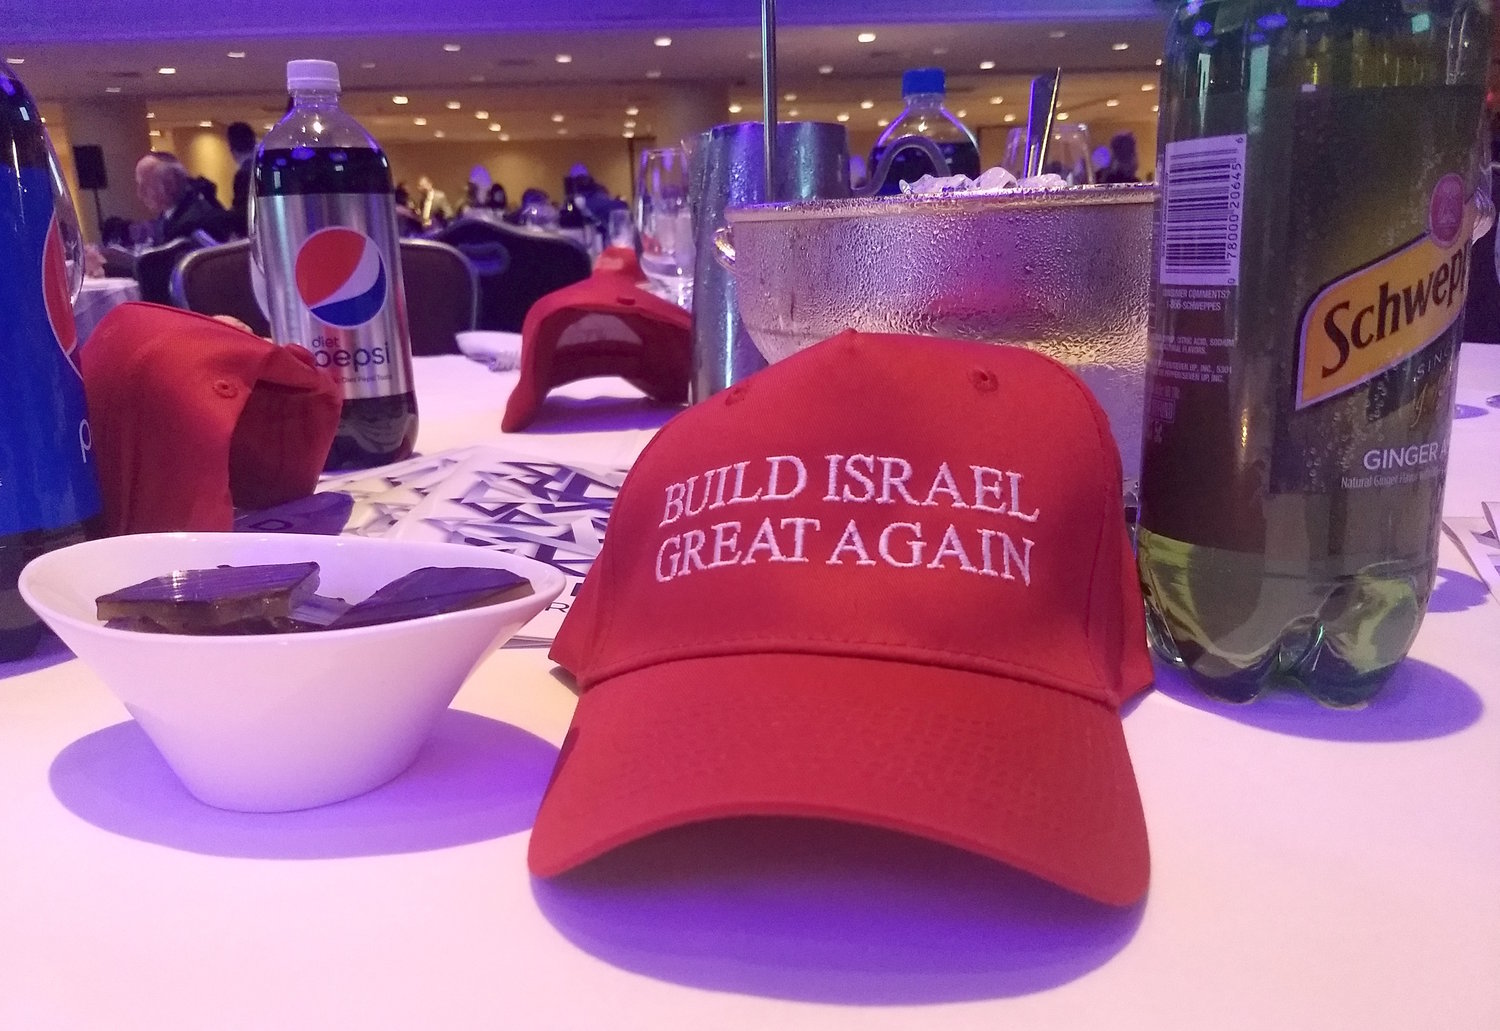 Trump-style red “Build Israel Great Again” hats were distributed to gala attendees.